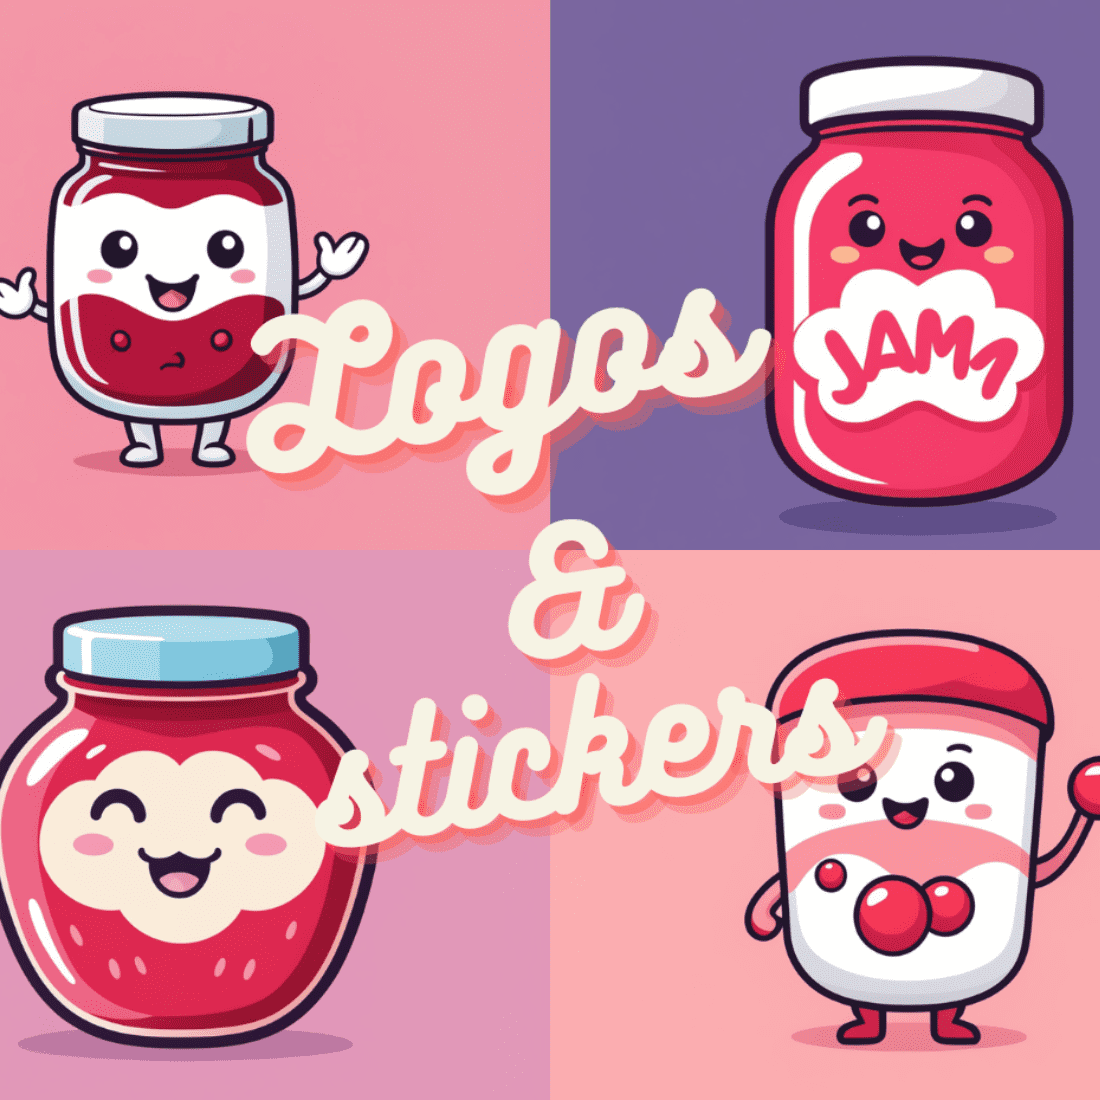 Cute logos or stickers preview image.